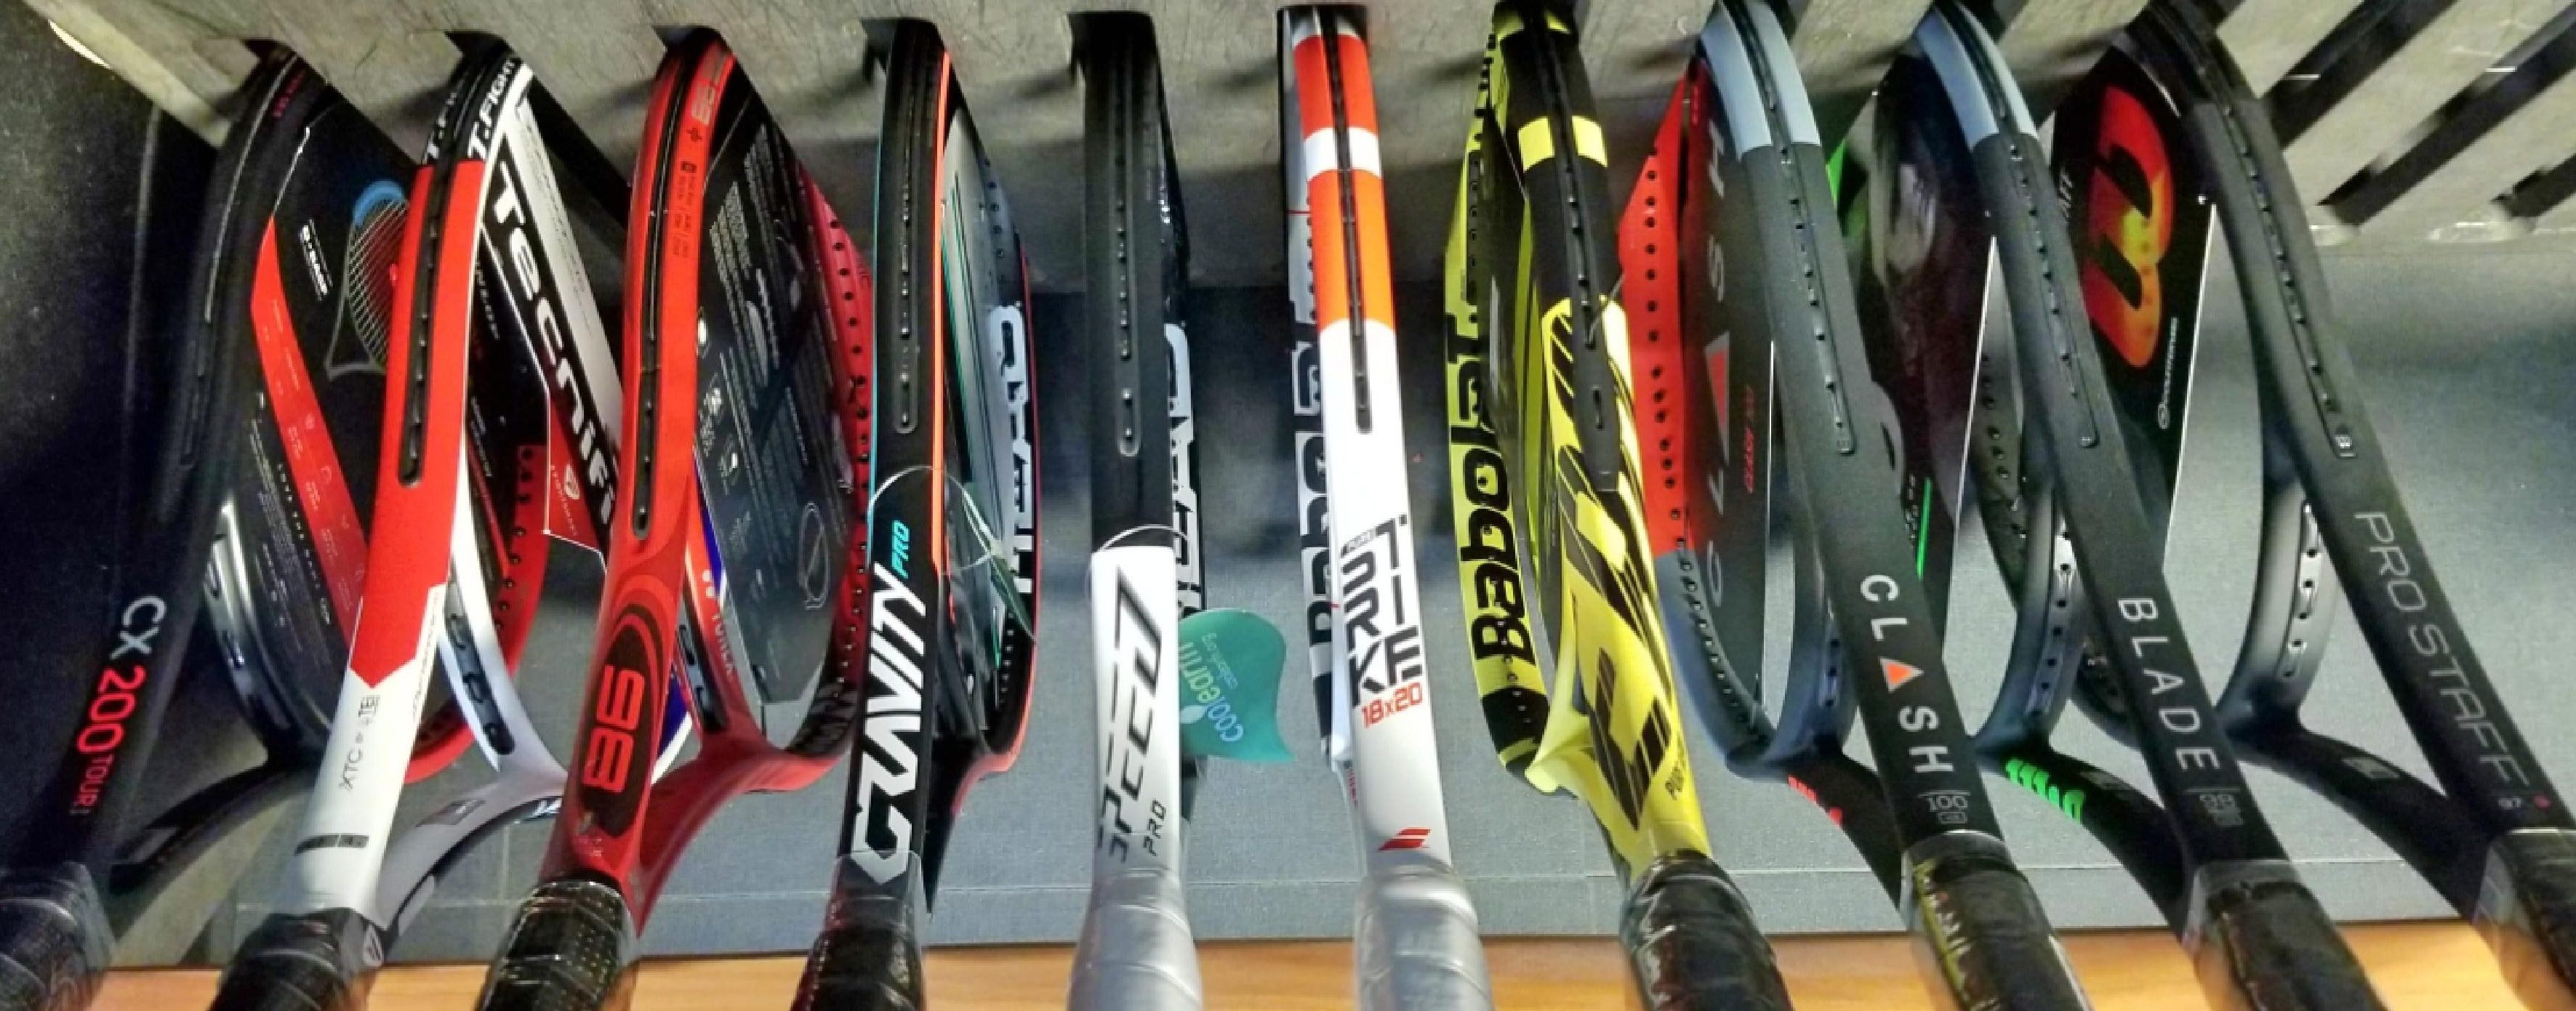 10 Racquets to Improve Your Game Blog Thmbnail